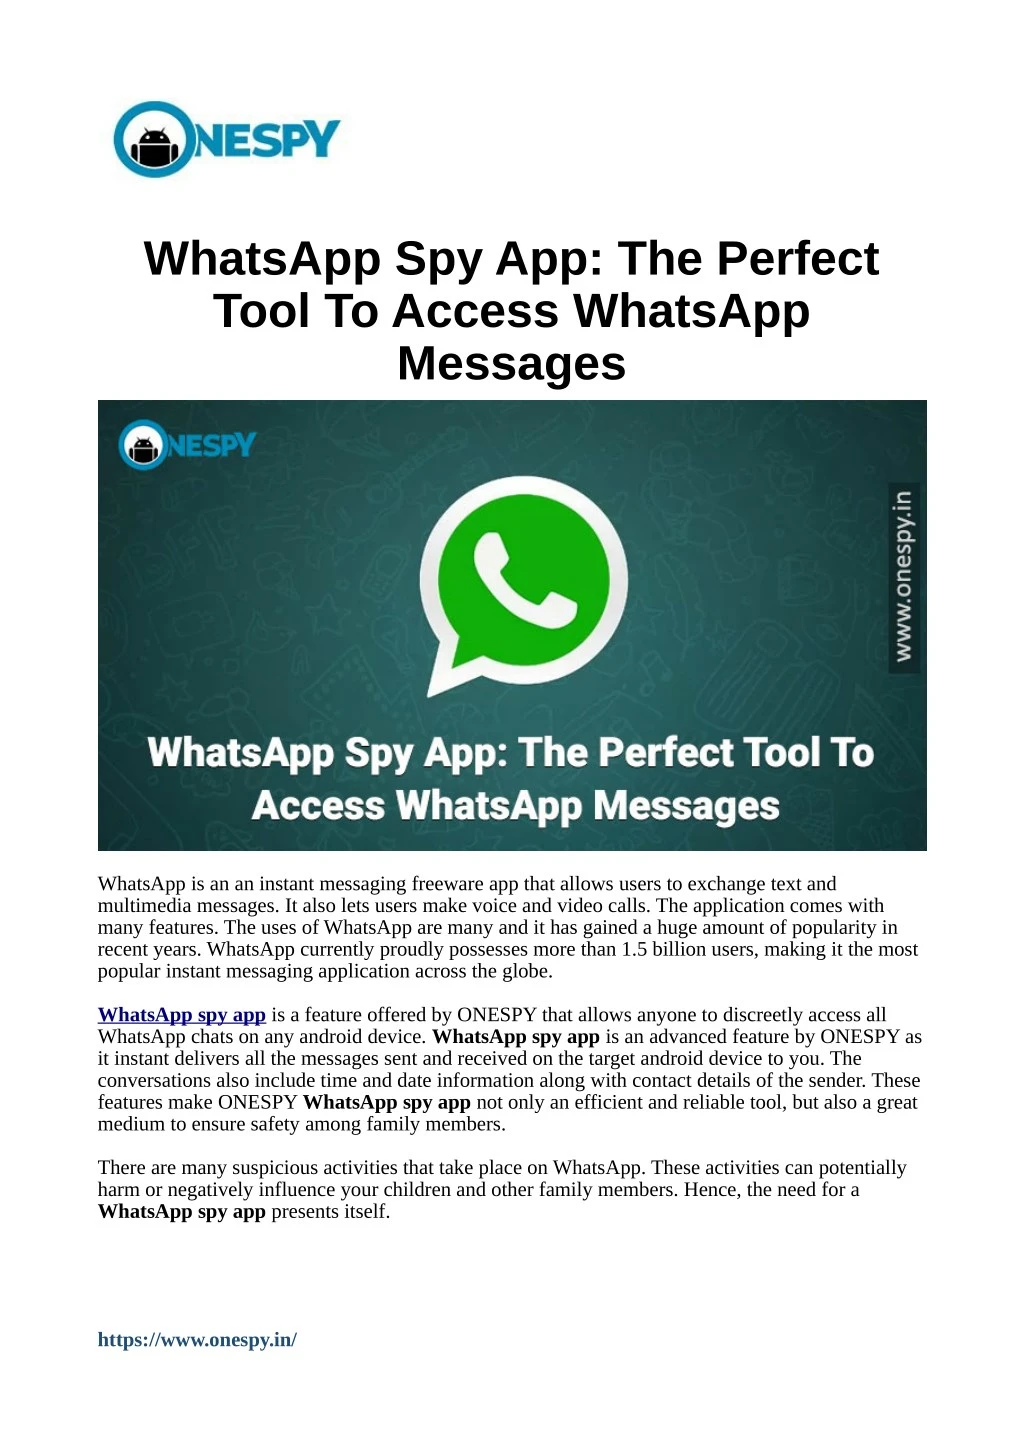 whatsapp spy app the perfect tool to access